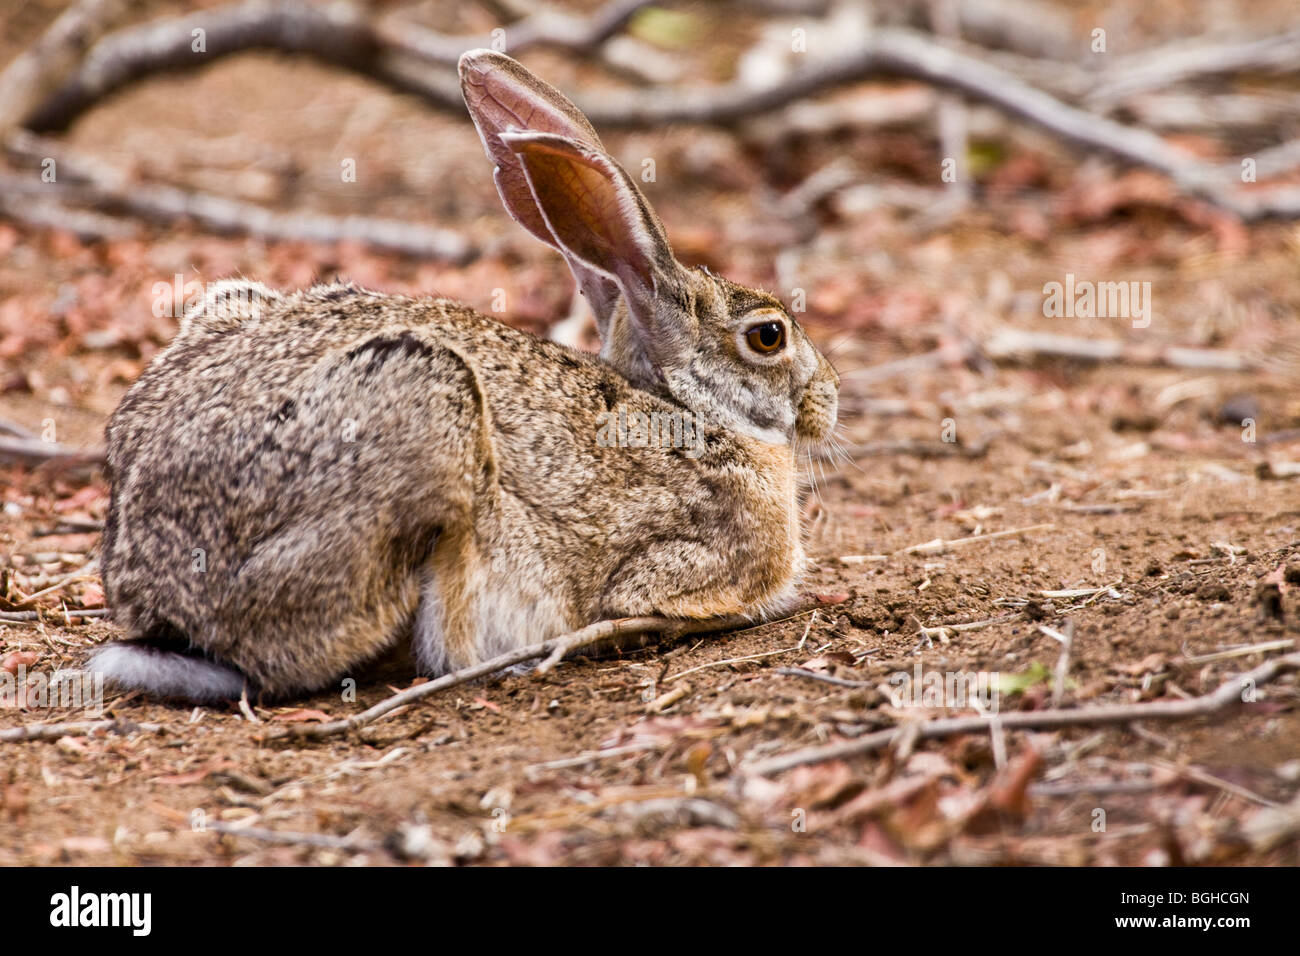 Cape or African hare Stock Photo